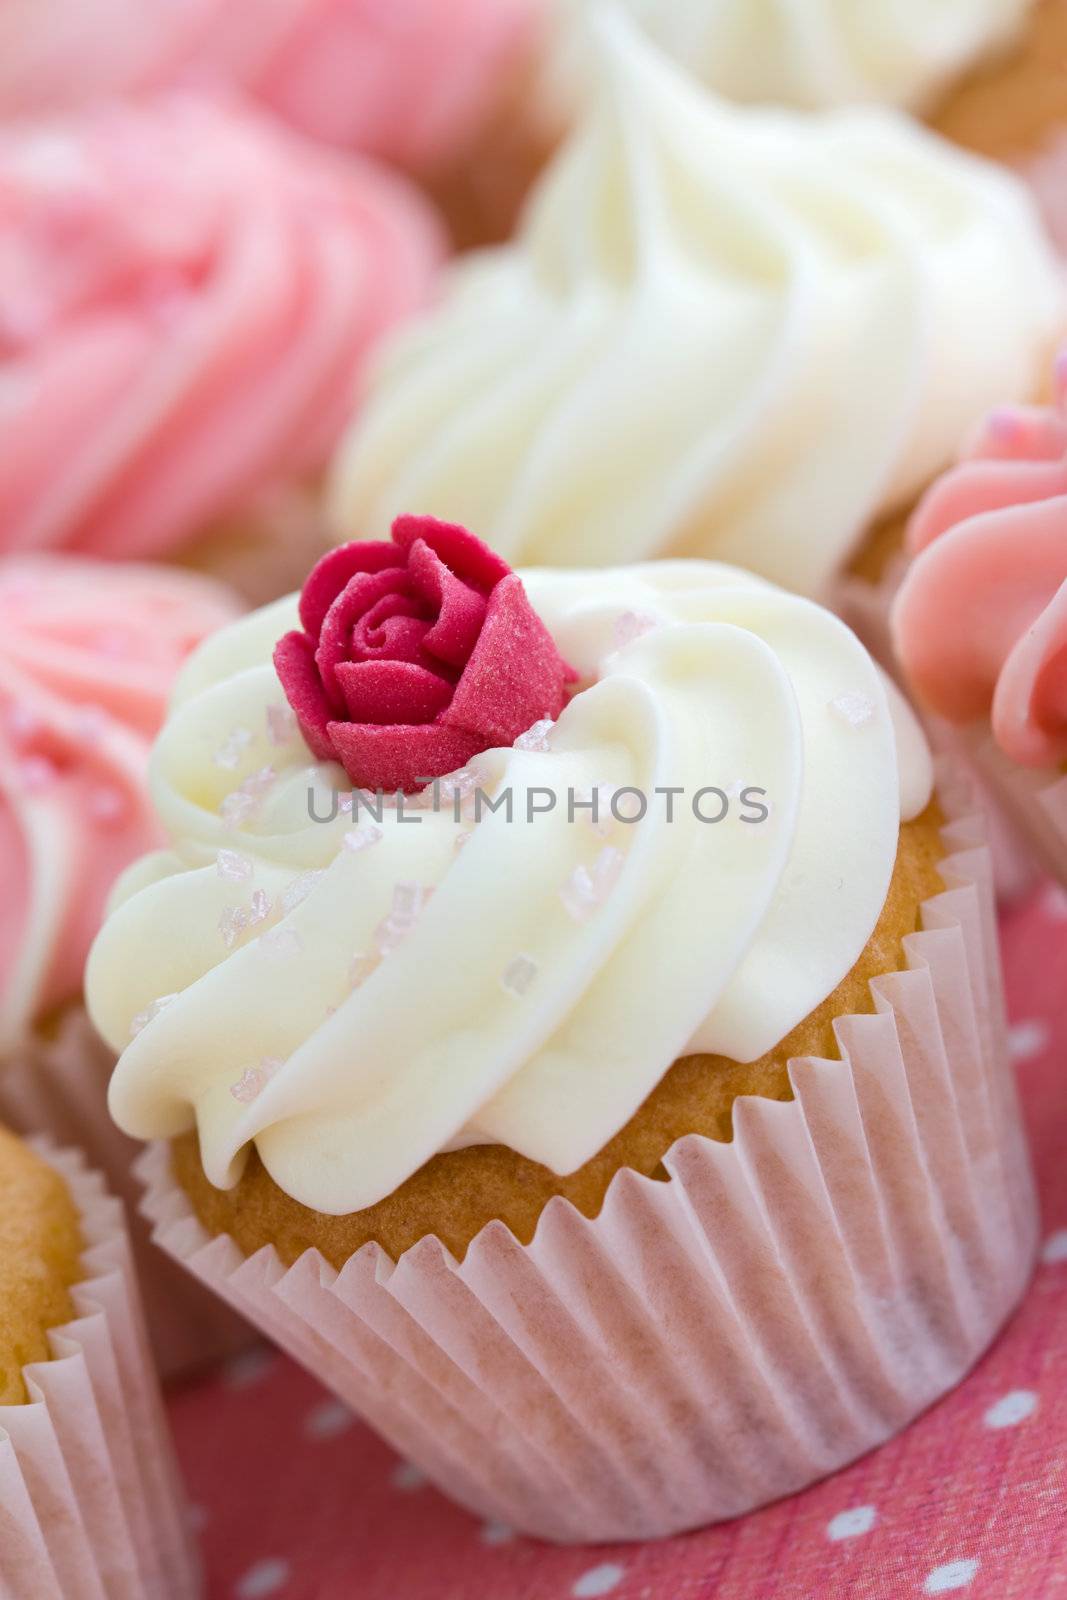 Assortment of pink and white cupcakes